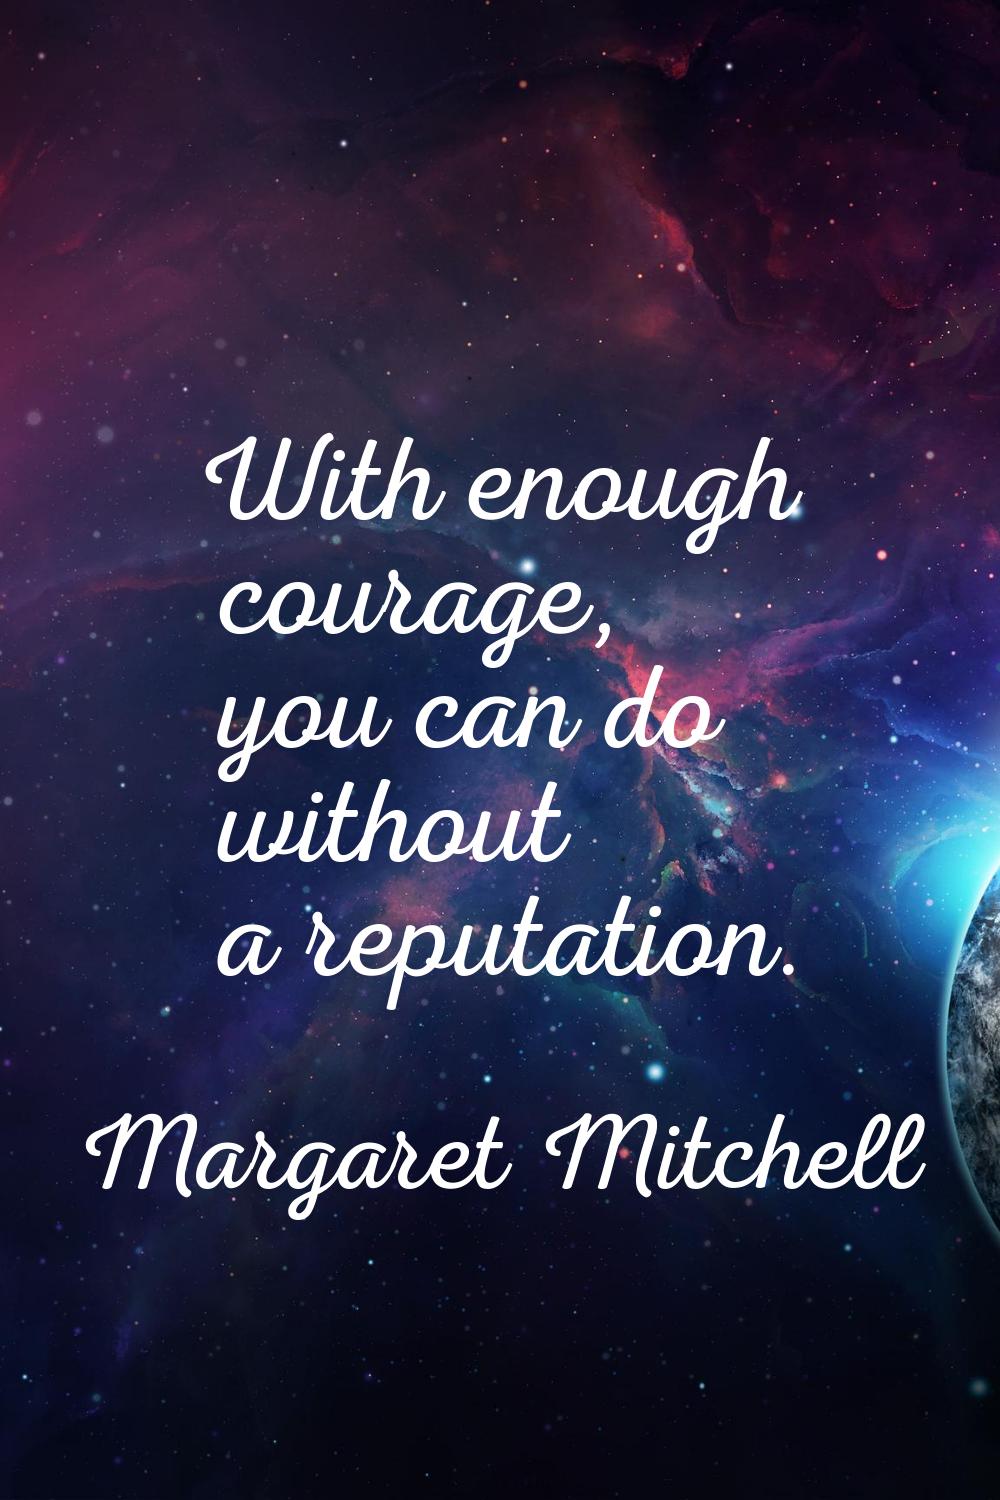 With enough courage, you can do without a reputation.